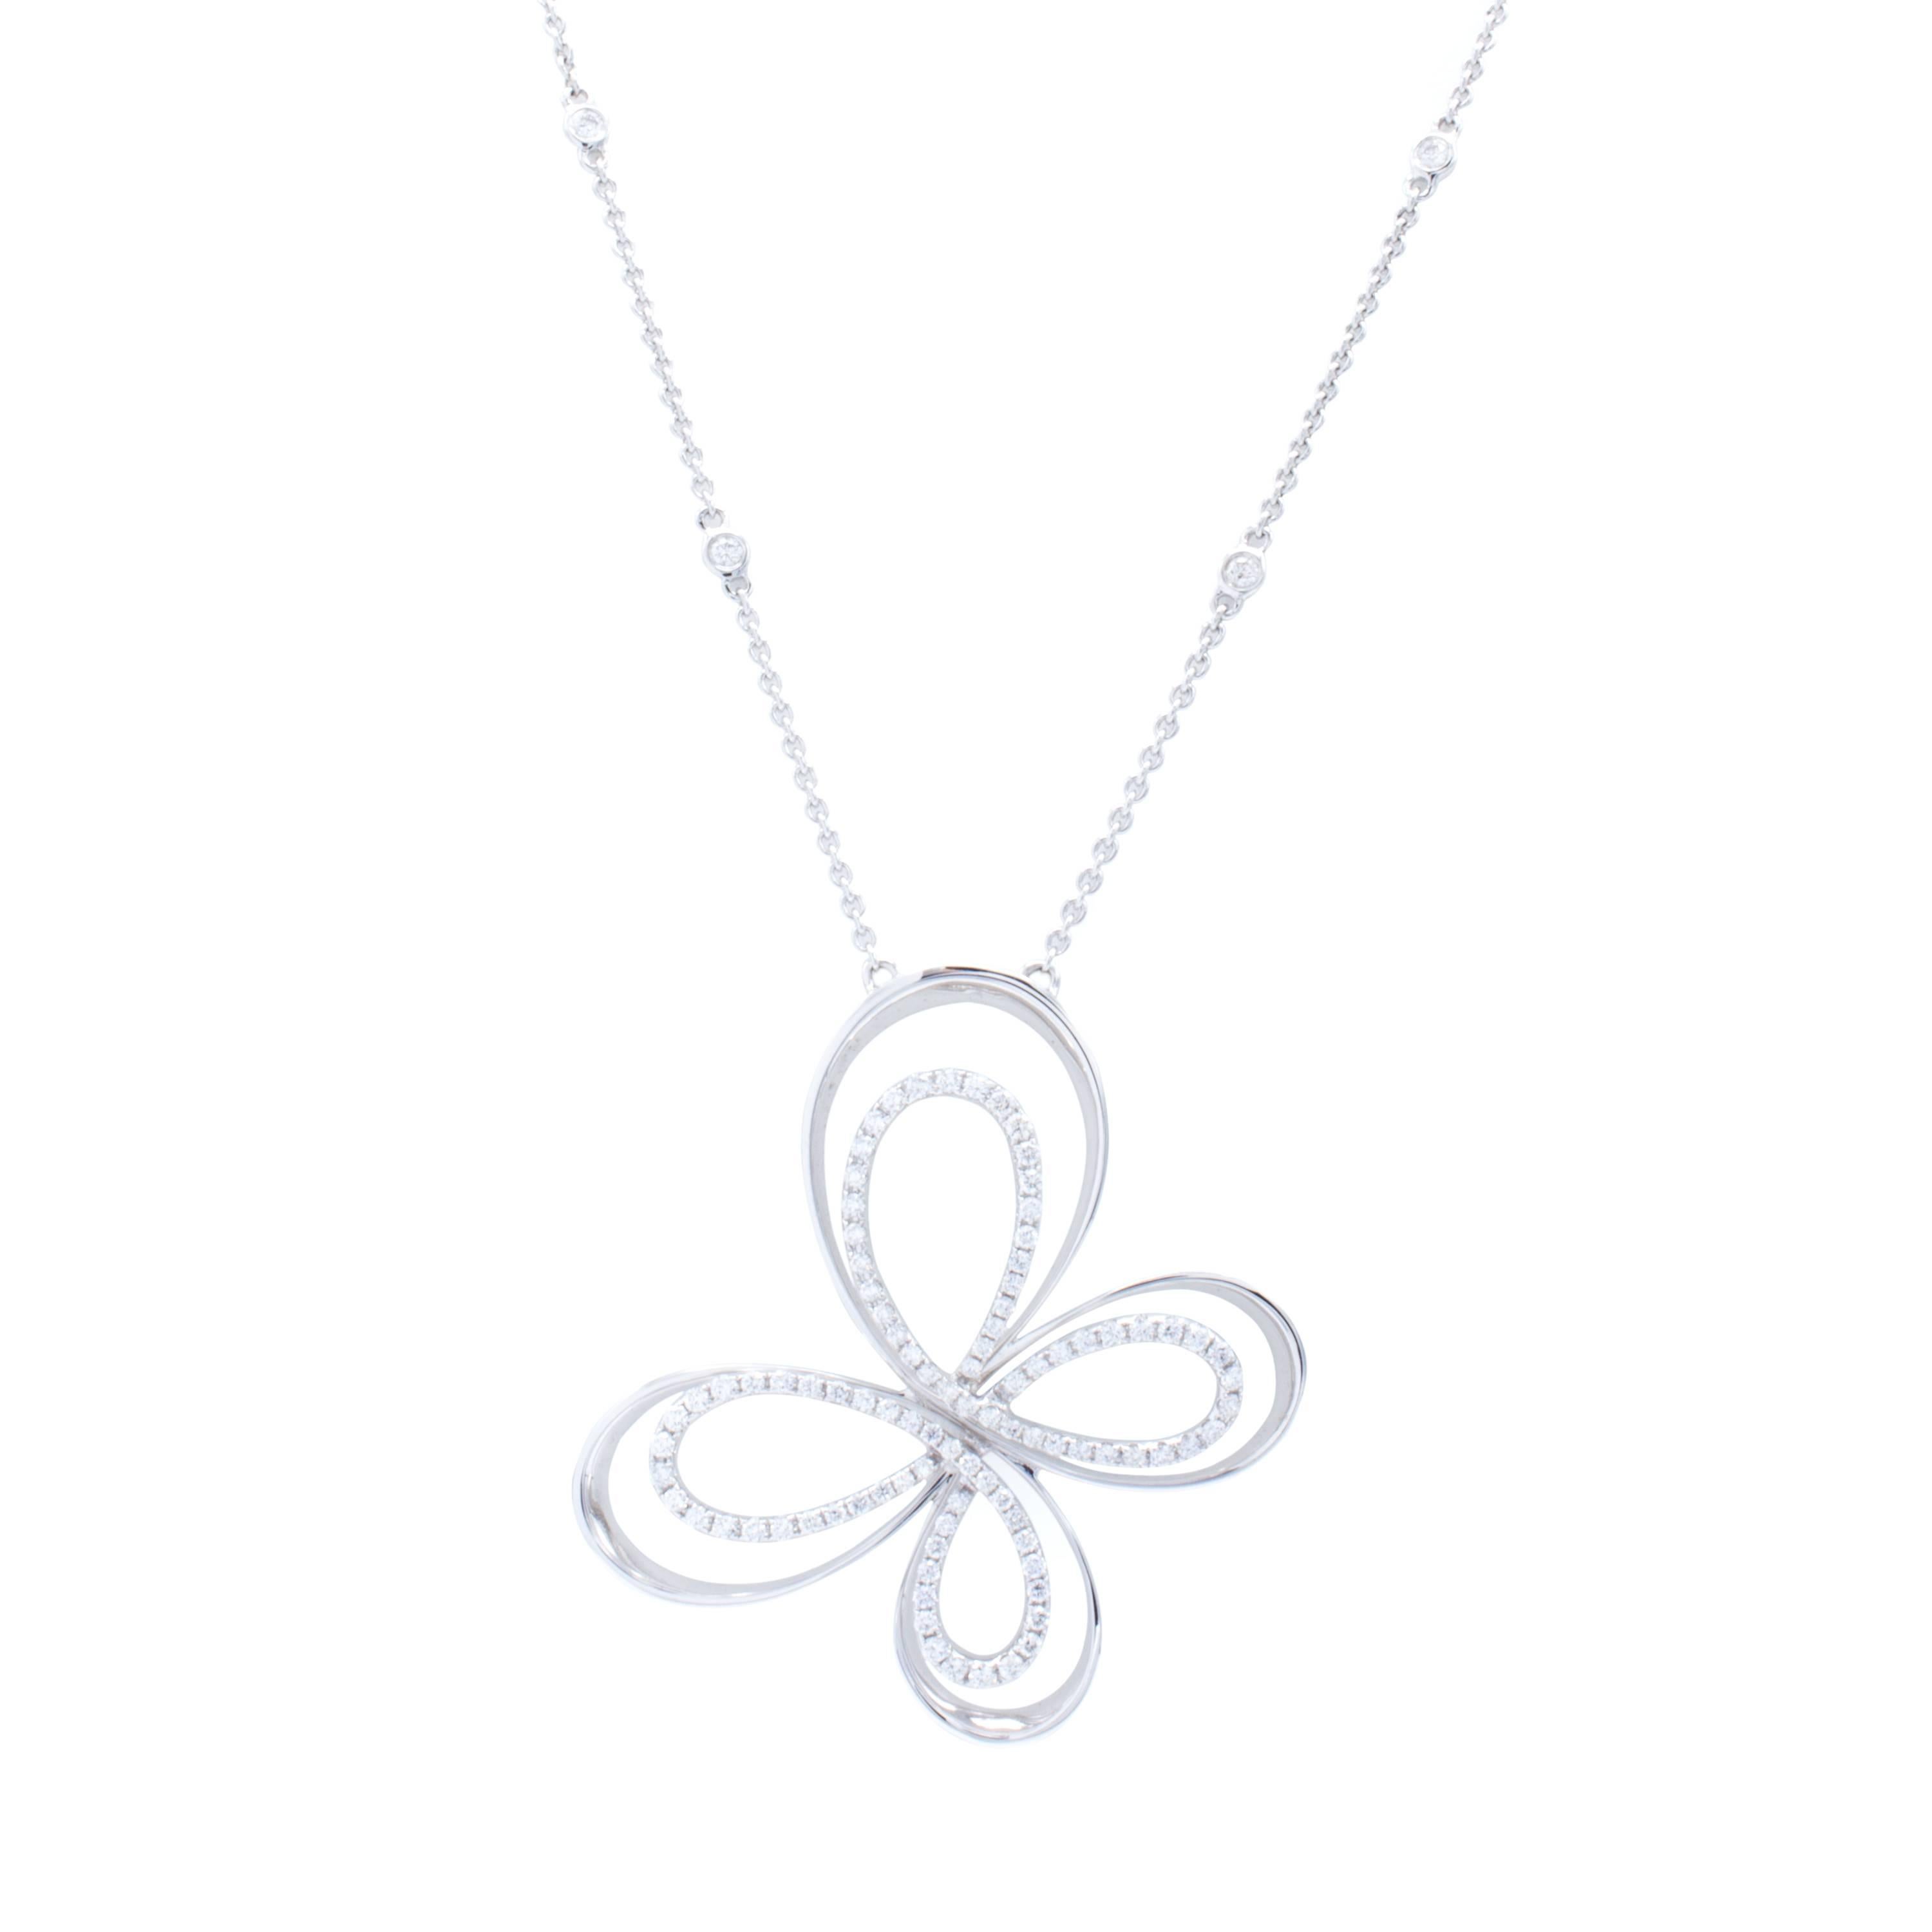 An elegant butterfly pendant shines with 1.15 carats of glittering round brilliant white pave diamonds. The motif is crafted beautifully to float lifelike upon a diamonds by the yard style necklace of 18Kt white gold. Designed by David